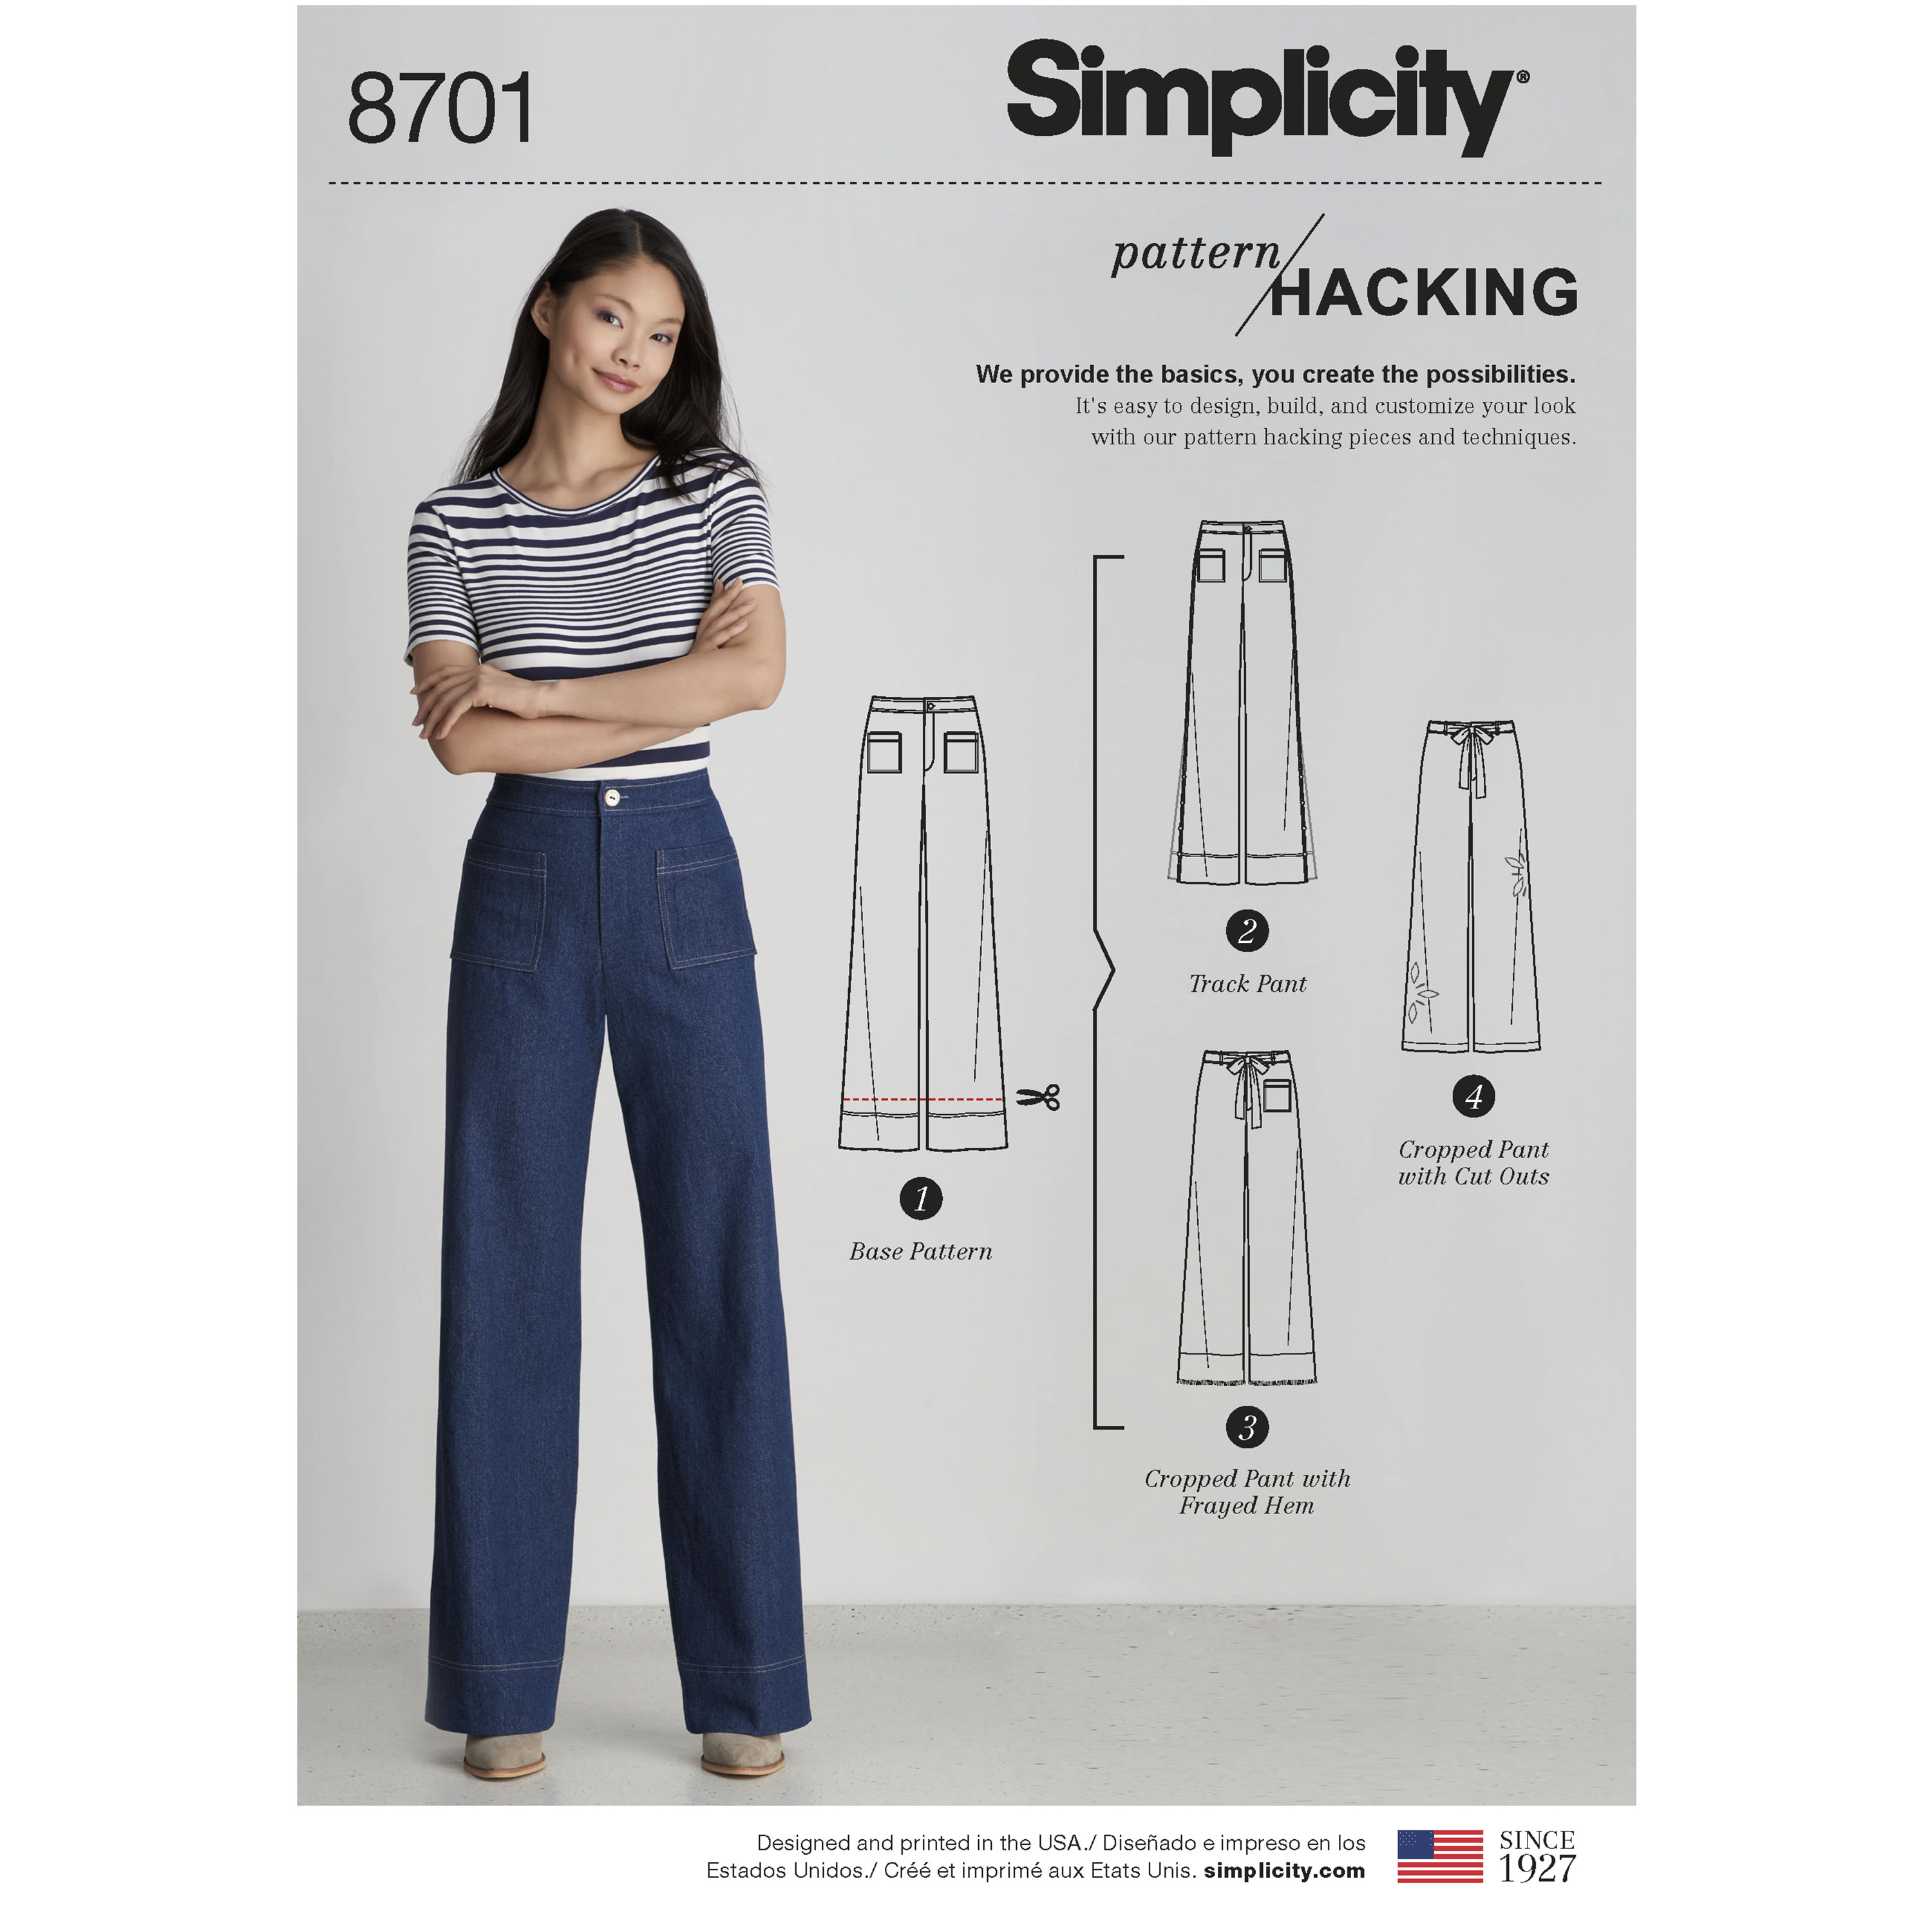 https://images.patternreview.com/sewing/patterns/simplicity/2018/8701/8701.jpg